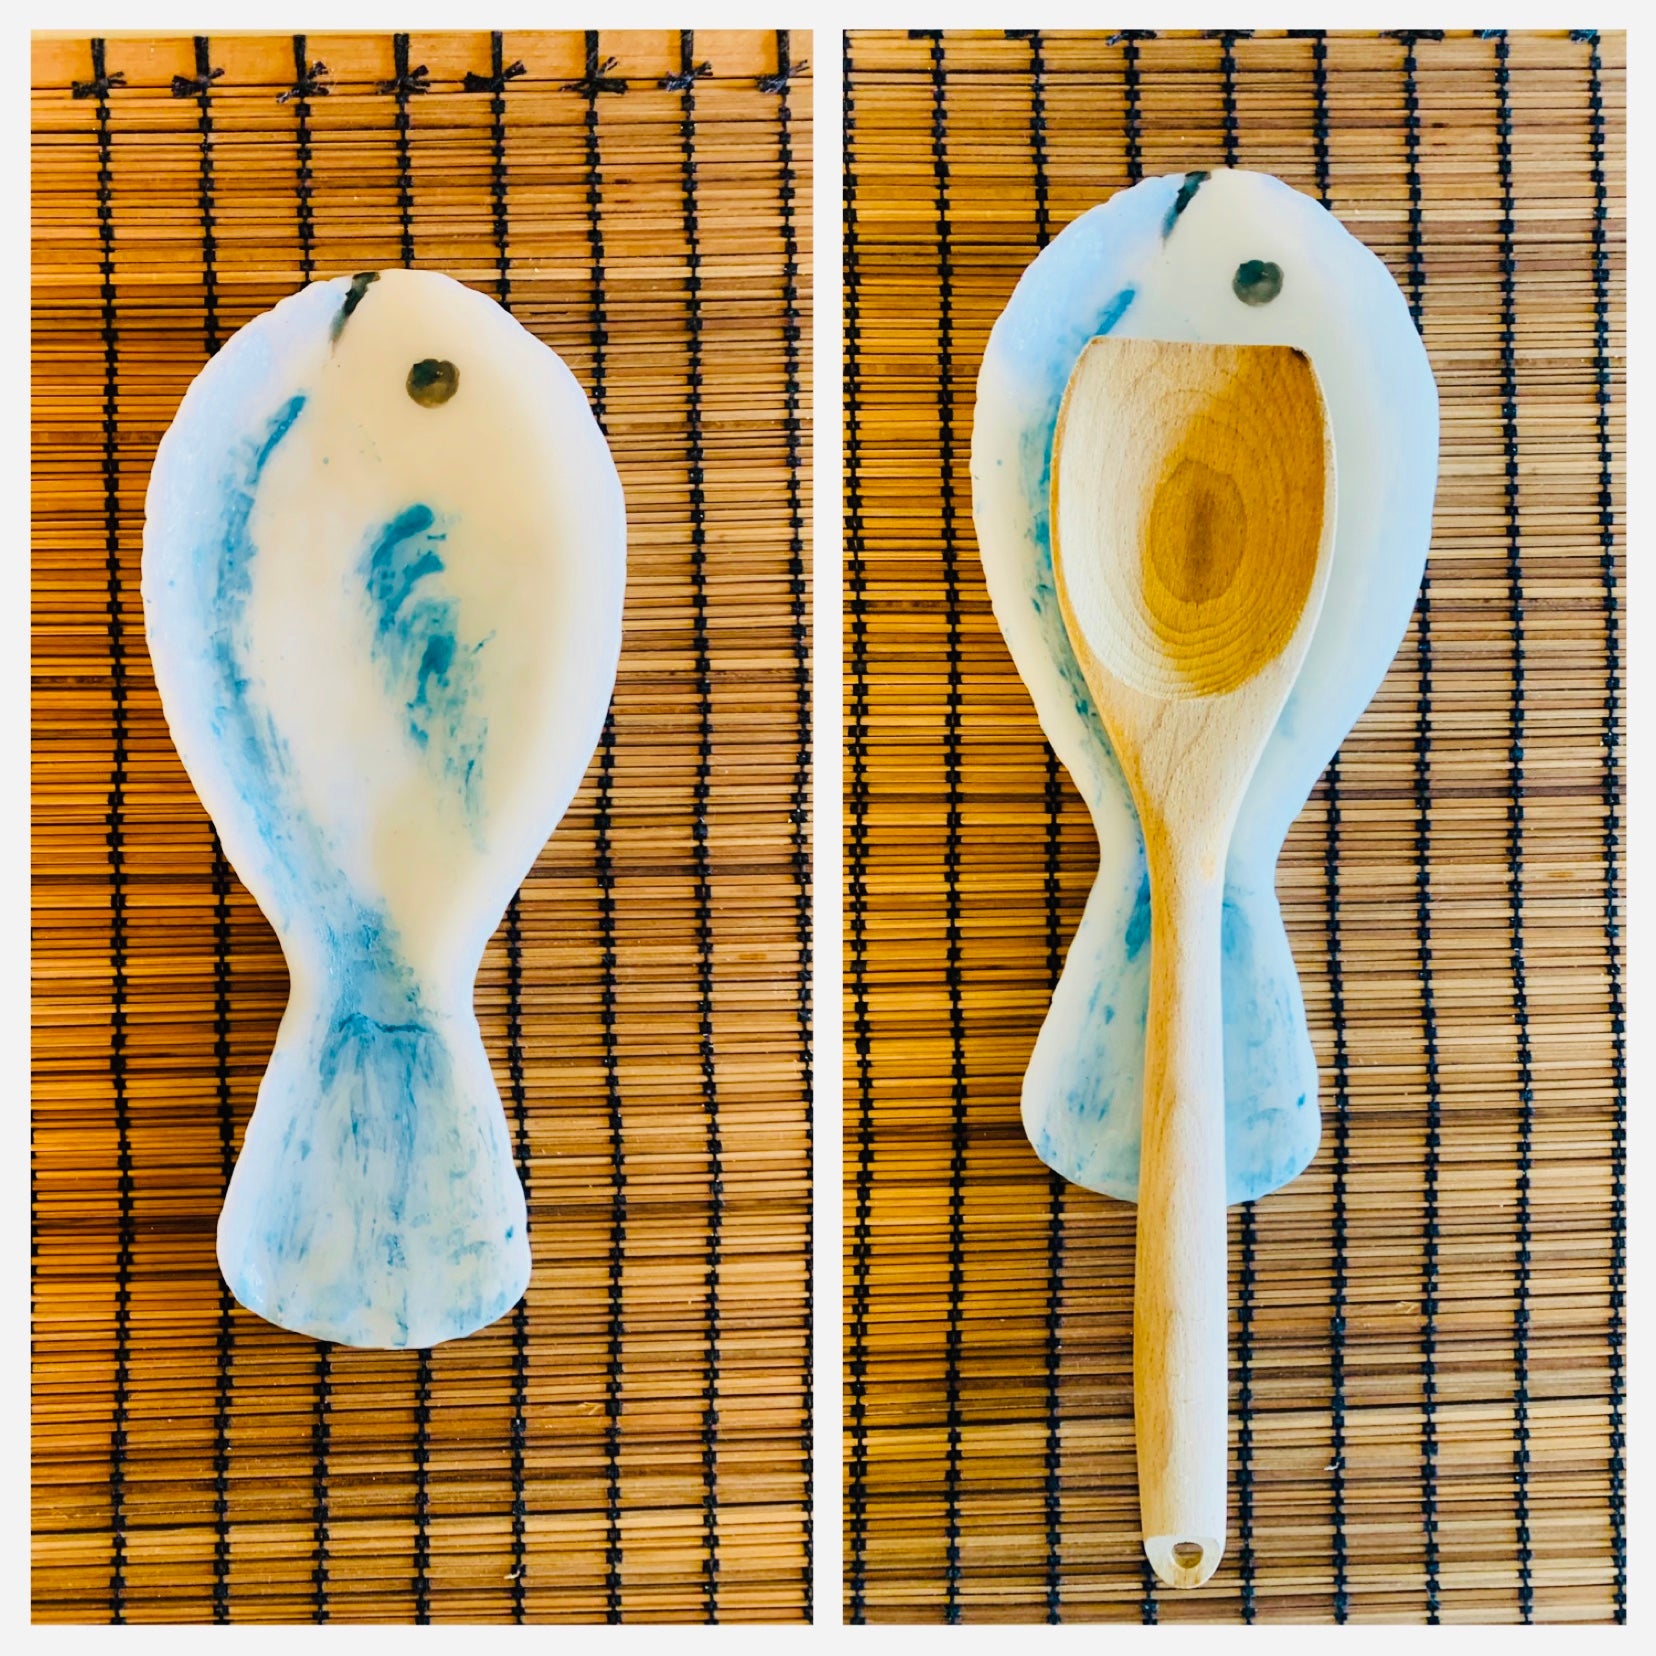 Spoon rest for the kitchen in the shape of a fish colored blue made with InstaMorph moldable plastic.